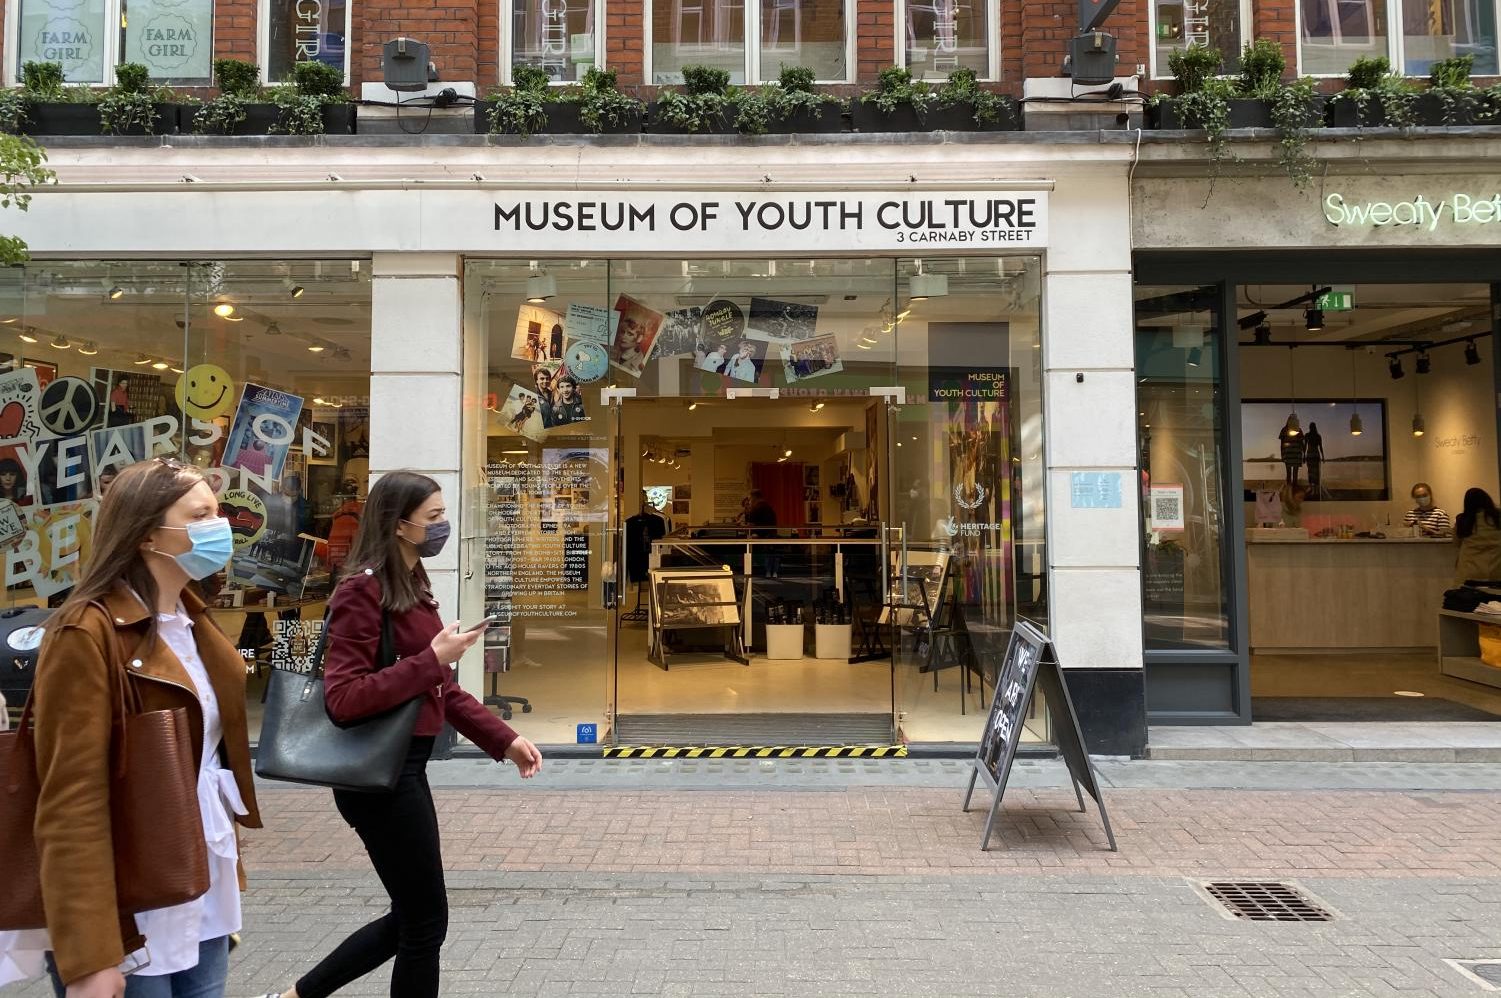 Located on Carnaby Street, the pop-up Museum of Youth Culture aims to create a documentation of the experience of growing up in the U.K. While attractions like the Tower of London may be more iconically British, hidden locations such as the Museum of Youth Culture reveal London in its truest form.